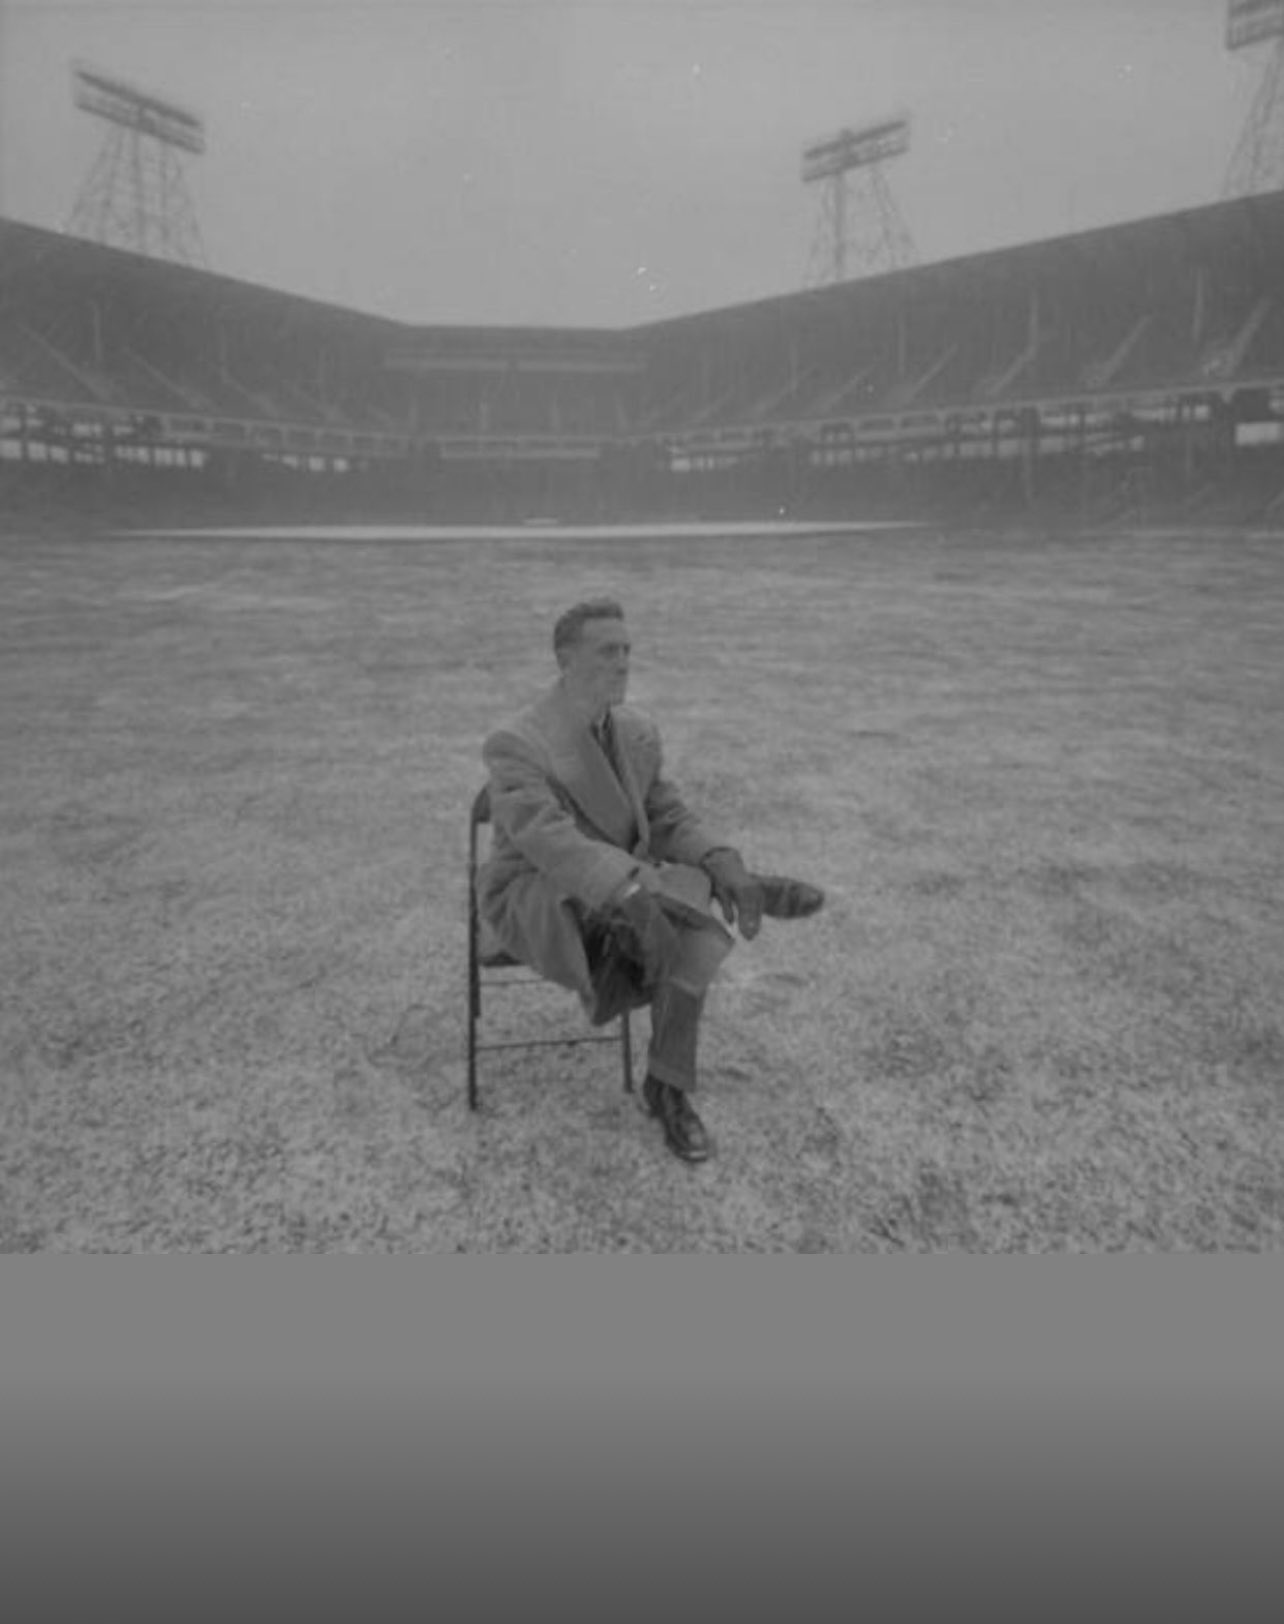 Vin Scully sitting in CF of Ebbets Field because https://t.co/bAbgMN8LNo